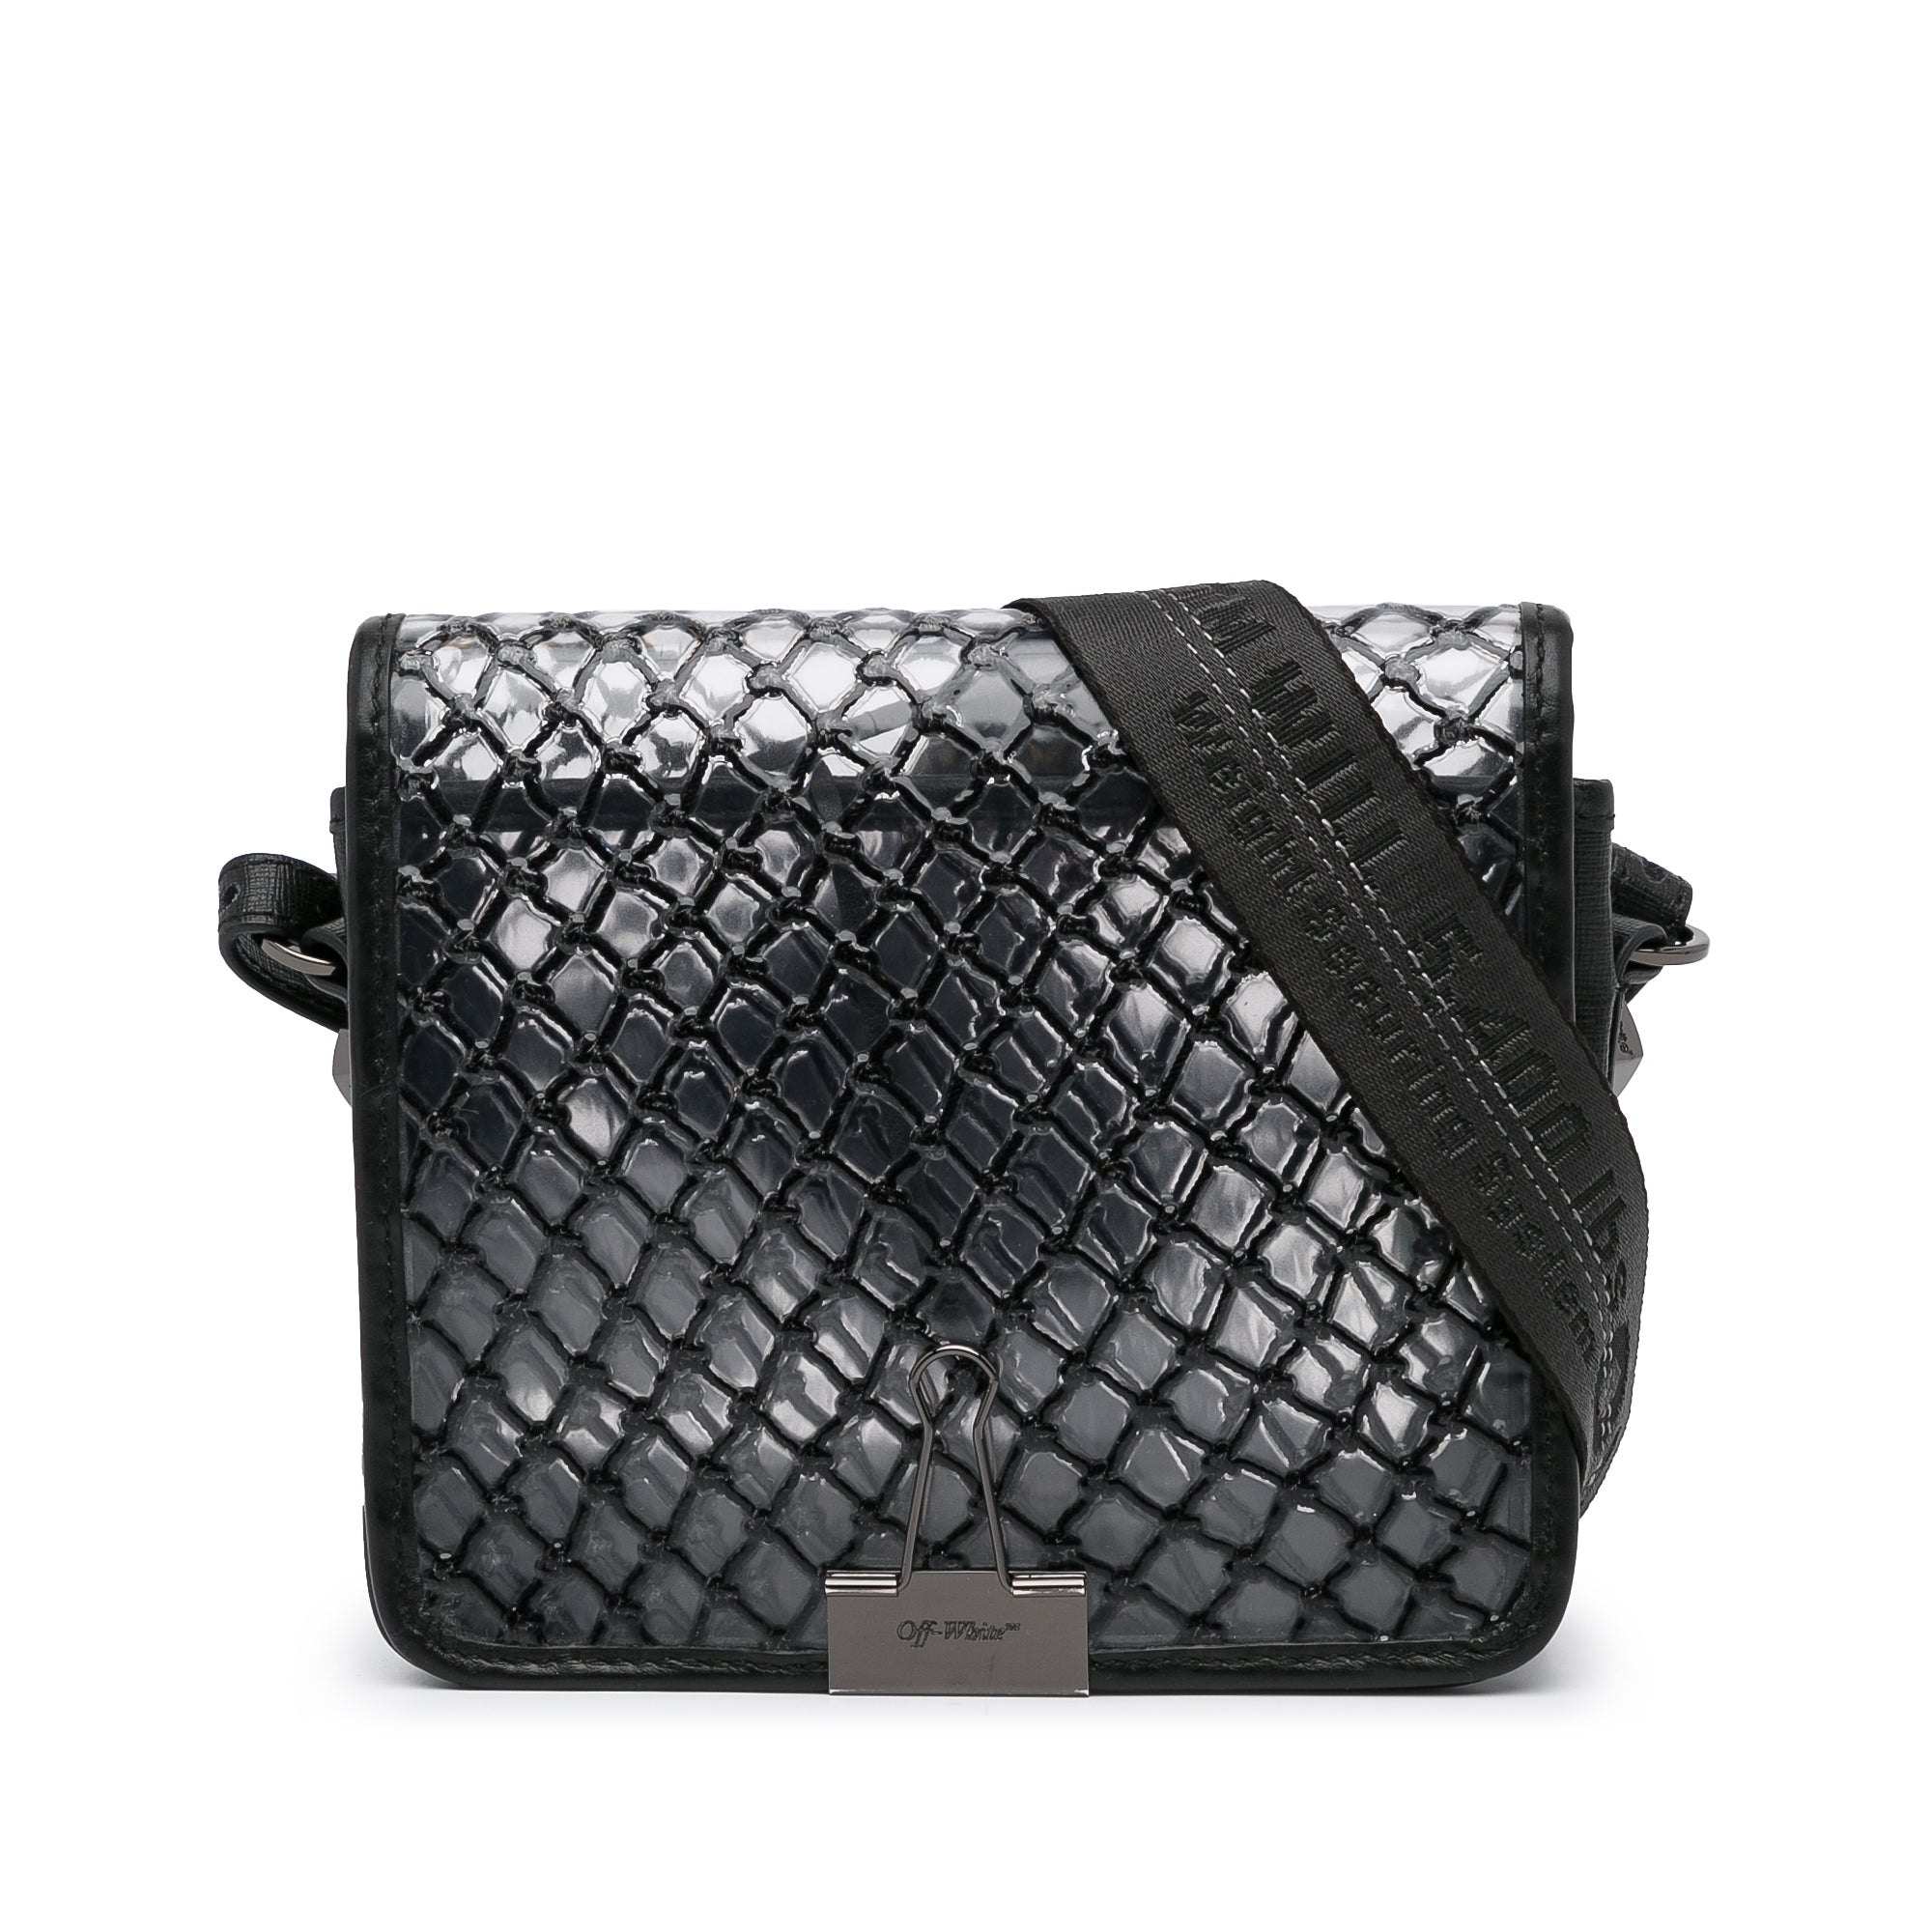 Sell Off-White Mini Clip Diagonal Bag with Industrial Strap - Black